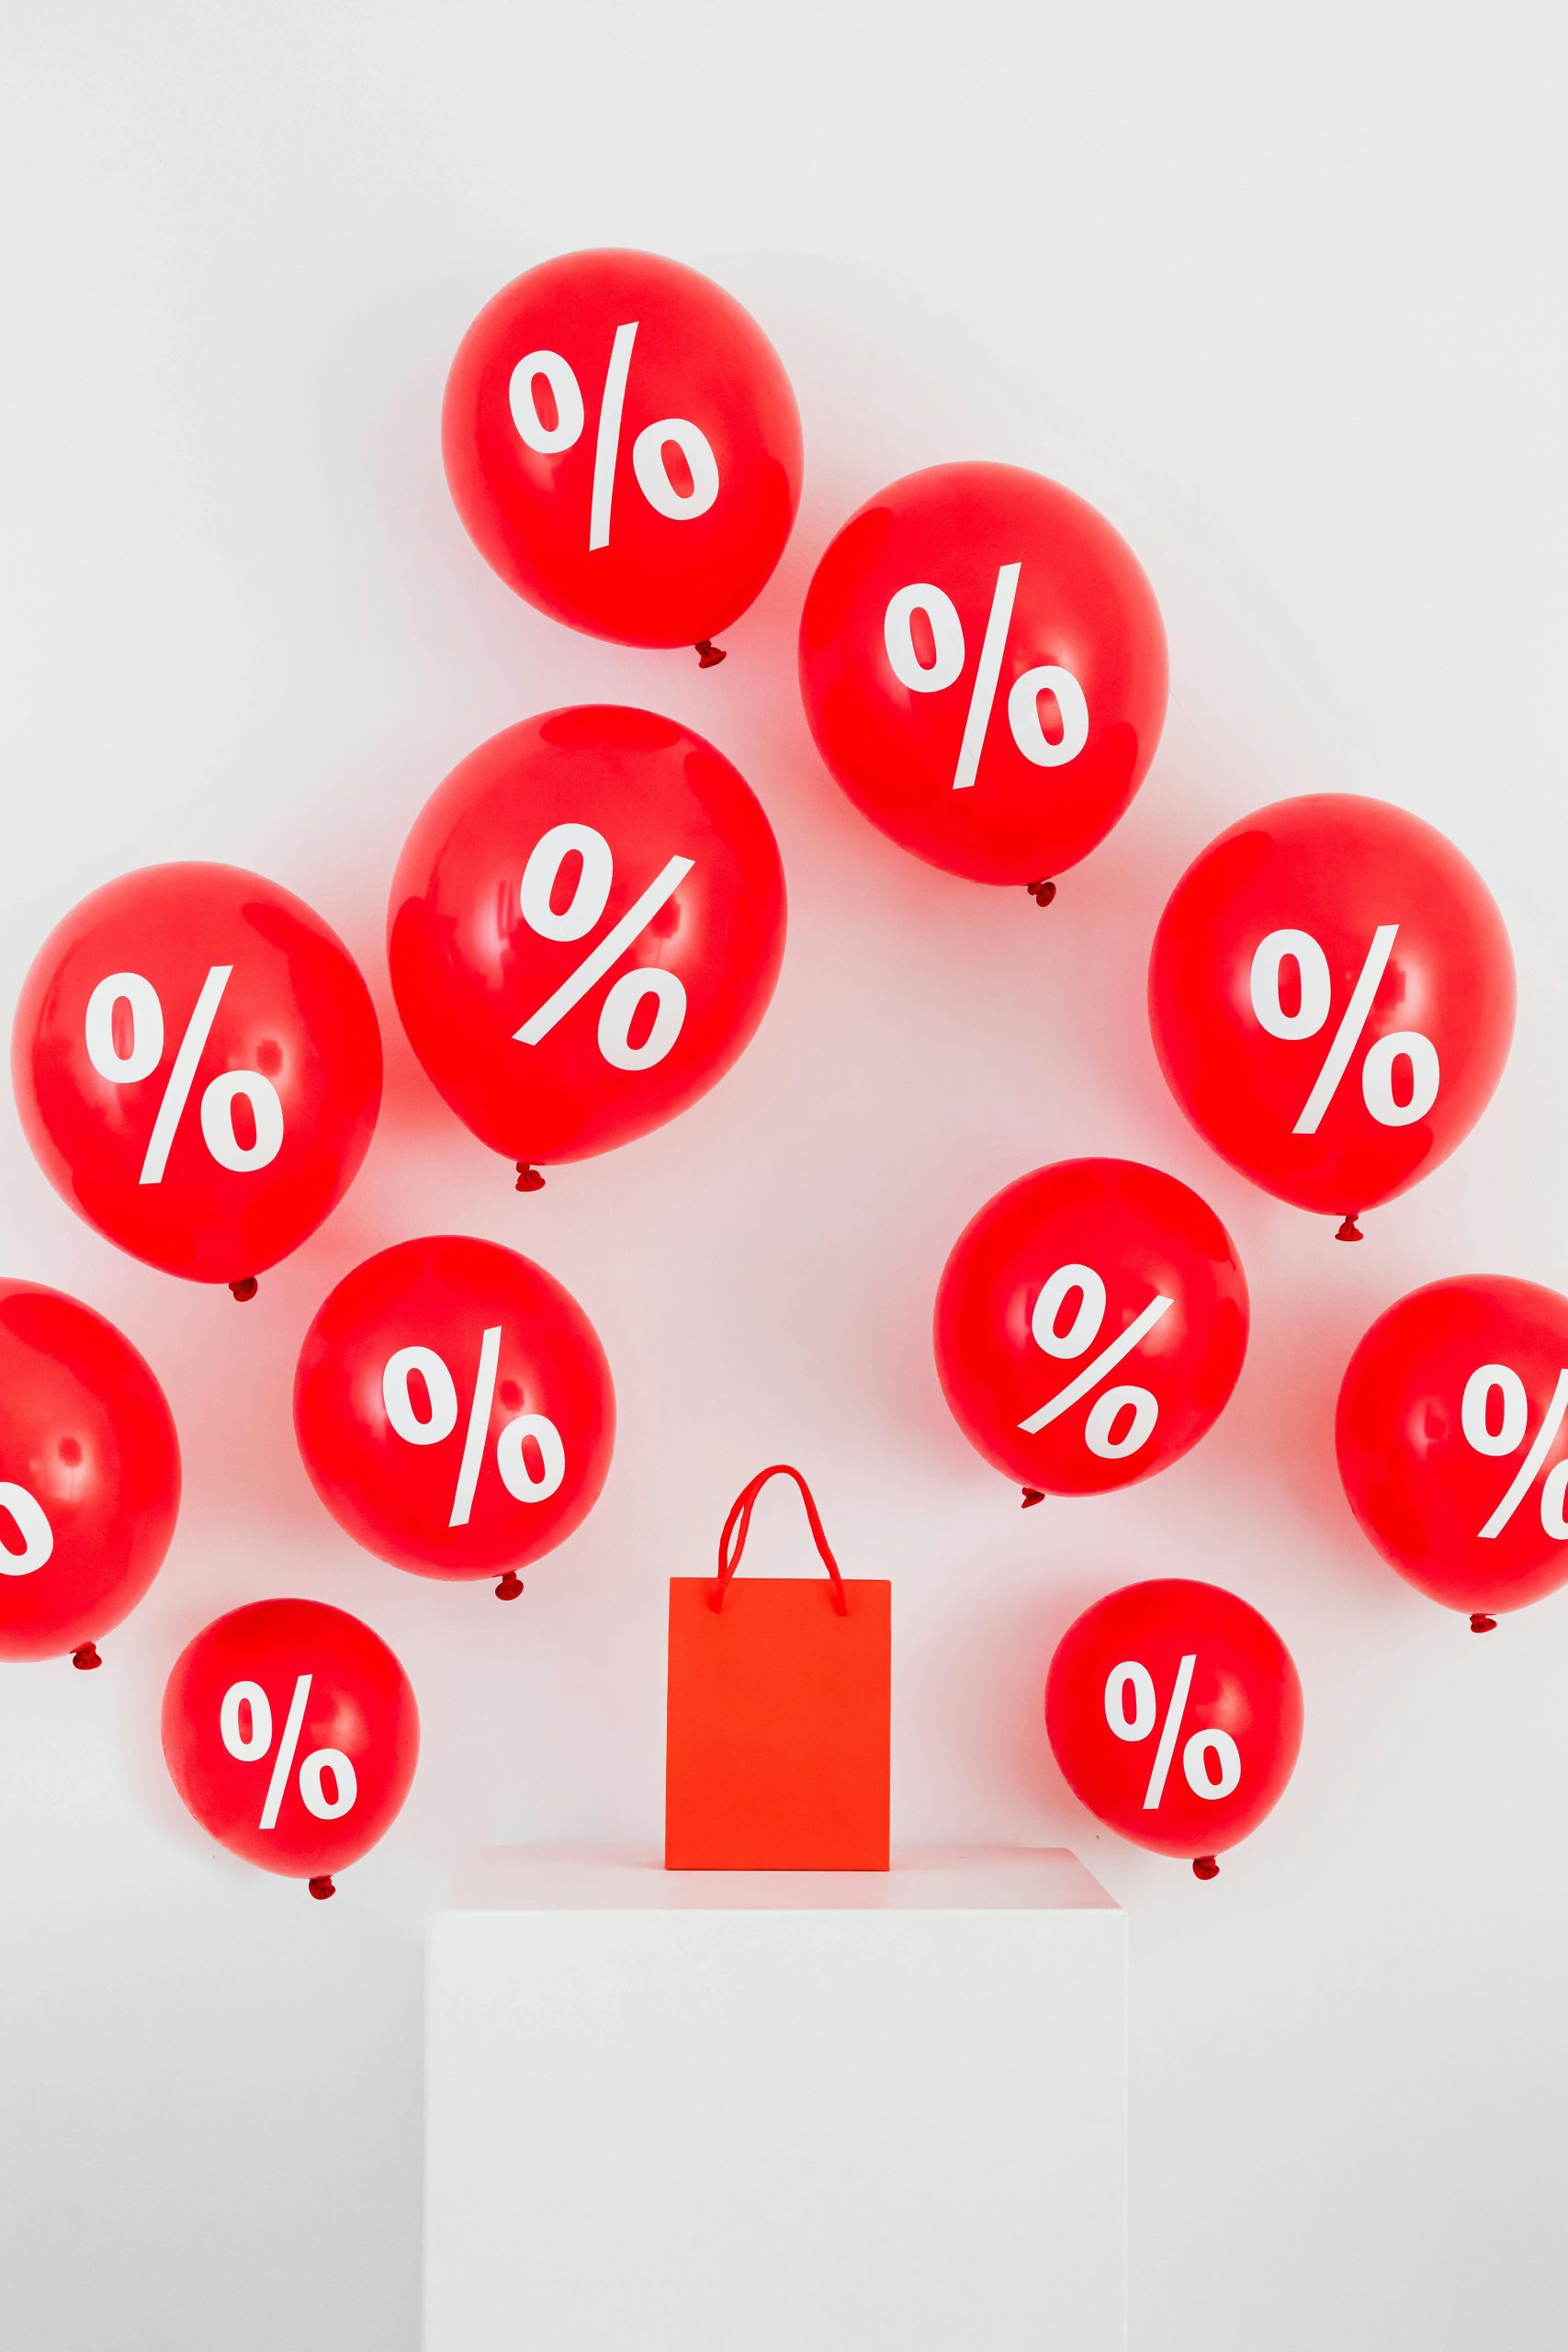 How to Boost Your Ecommerce Conversion Rate